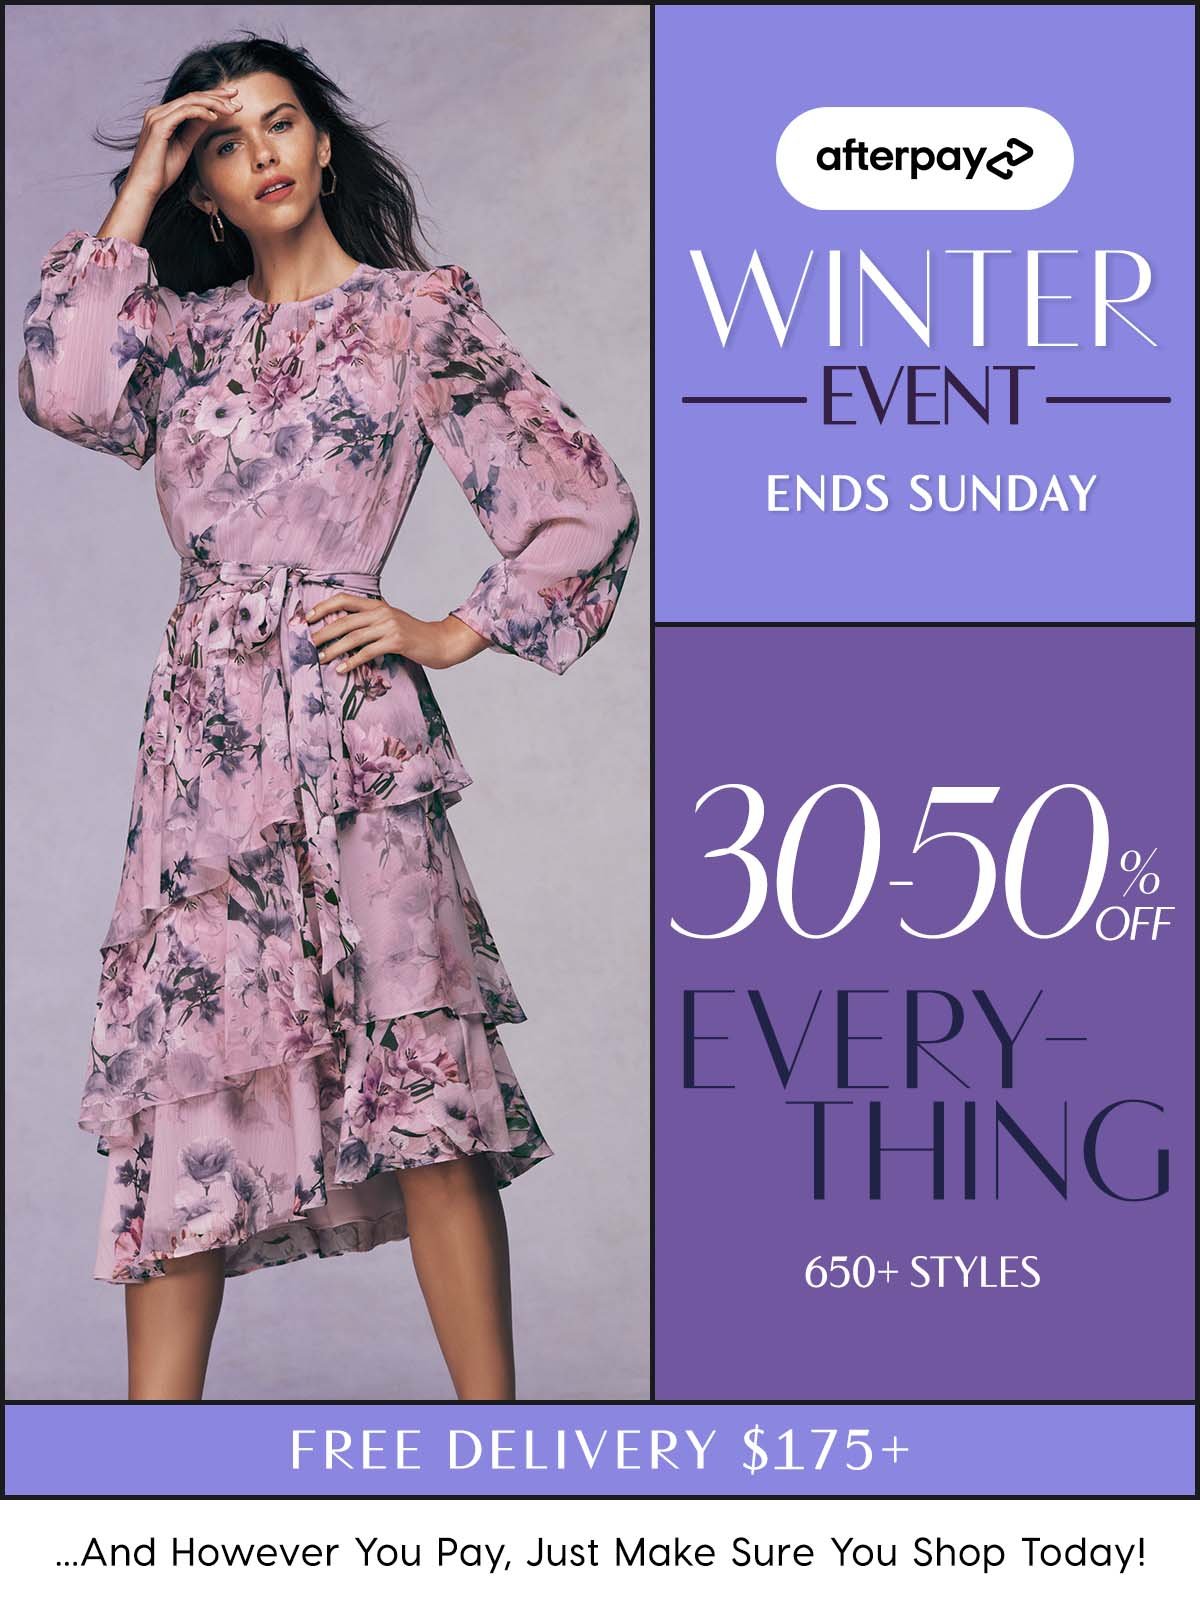 Afterpay Winter Event. Ends Sunday. 30-50% Off Everything. 650+ Styles. Free Delivery $175+ ...And However You Pay, Just Make Sure You Shop Today!  